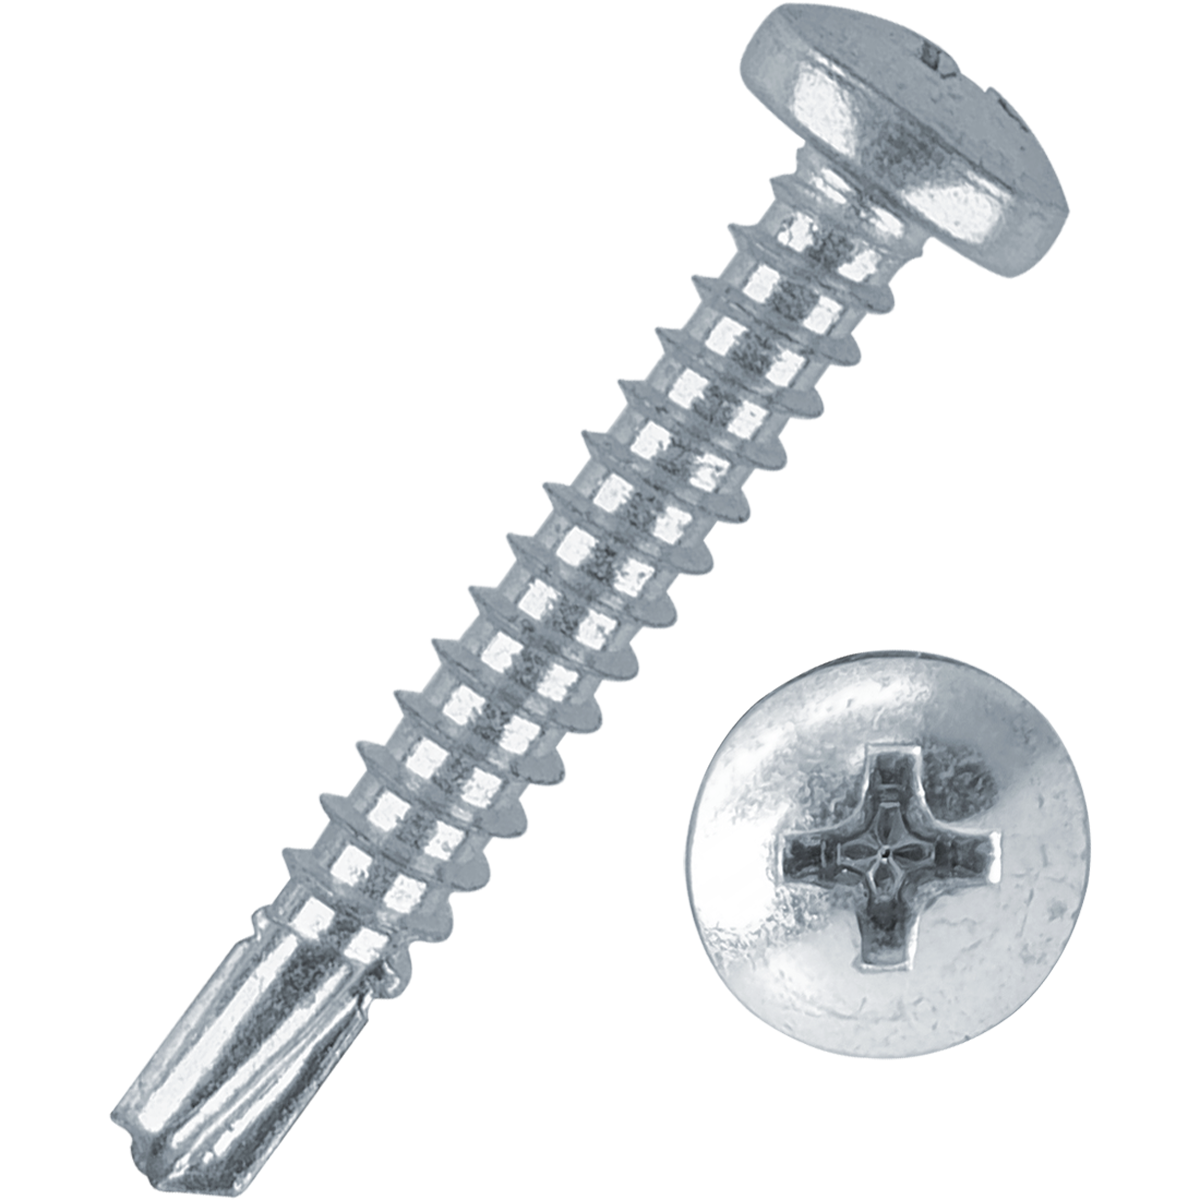 Pan head self drilling screws. A screw with drill bit like tip to quickly penetrate material without the need for pre-drilling a hole a drill bit like tip 